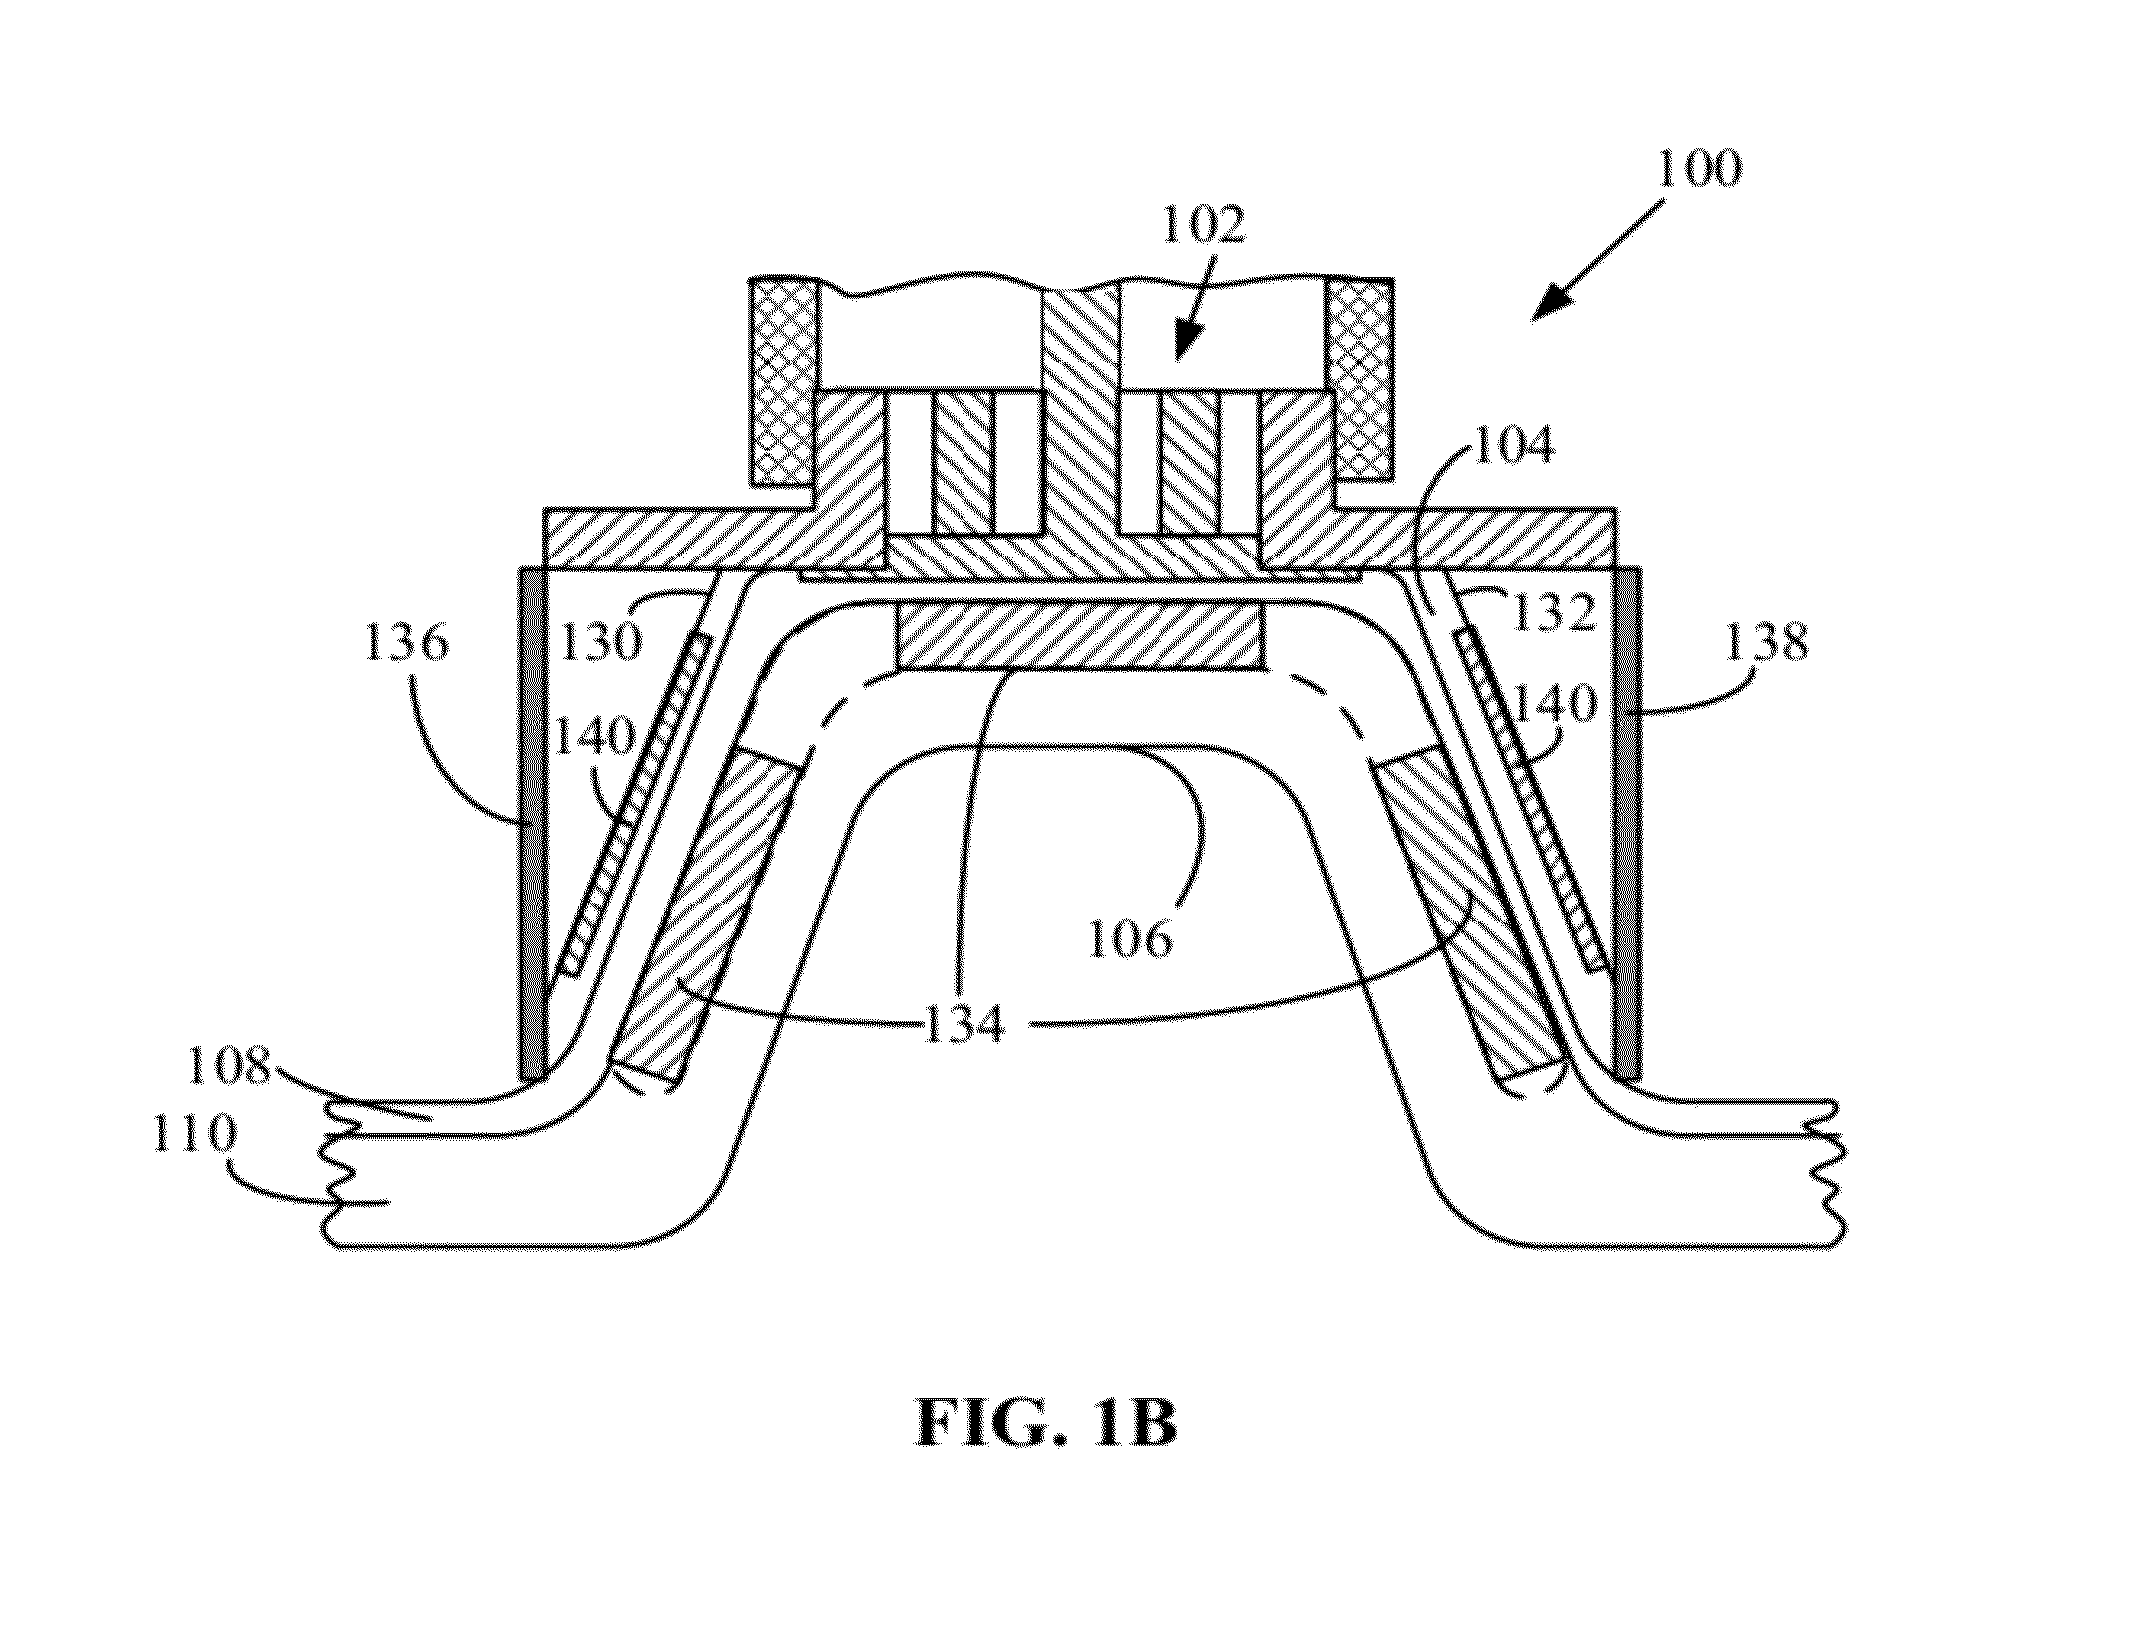 Method and apparatus for real time monitoring of tissue layers